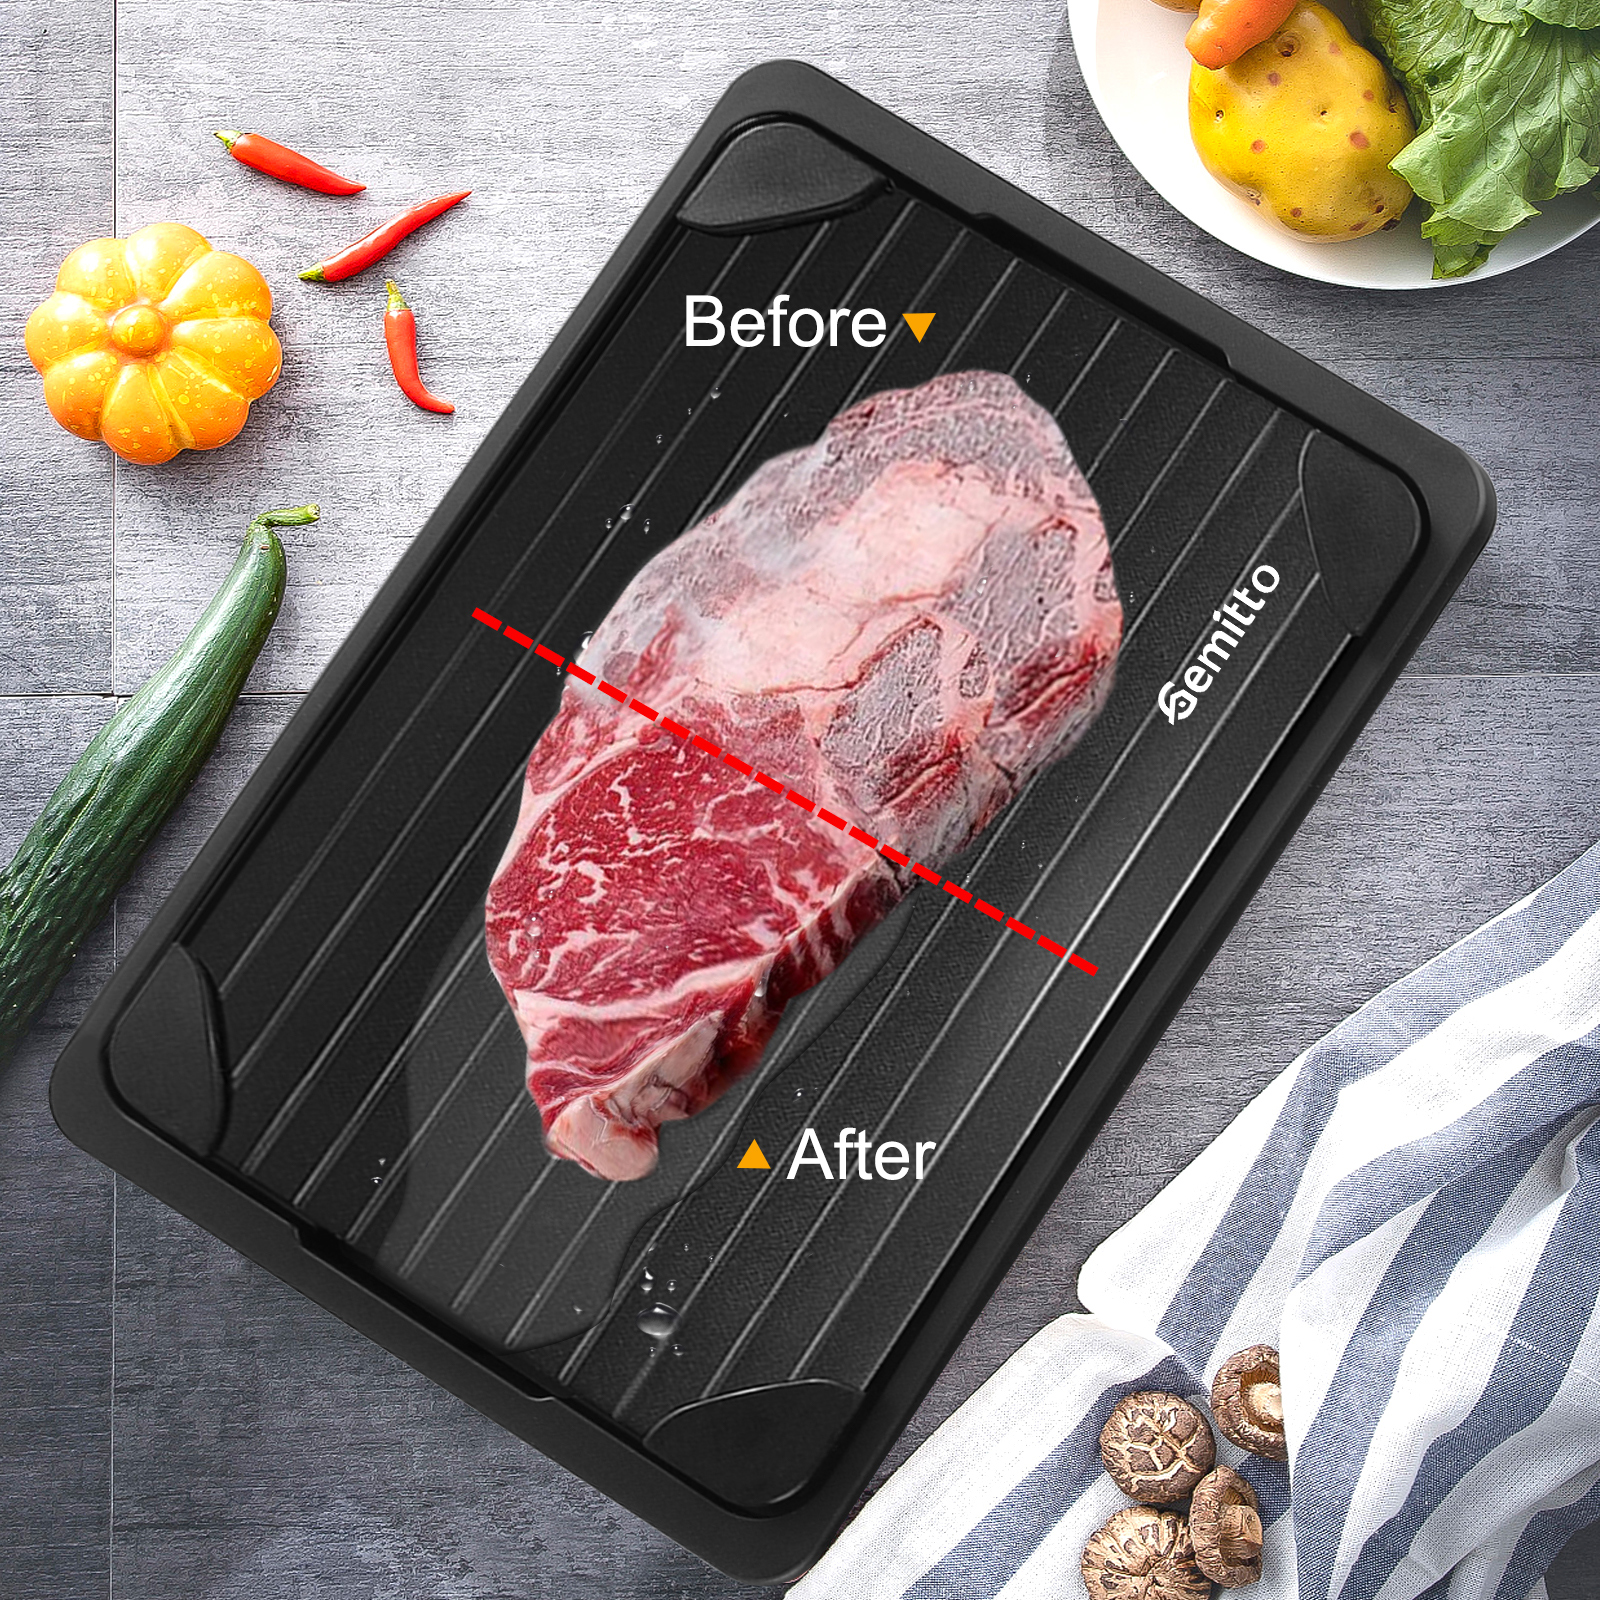 Defrosting-Tray-Thawing-Plate-Frozen-Food-Faster-and-Safer-Way-to-Defrost-Meat-or-Frozen-Food-Plate-1344447-3